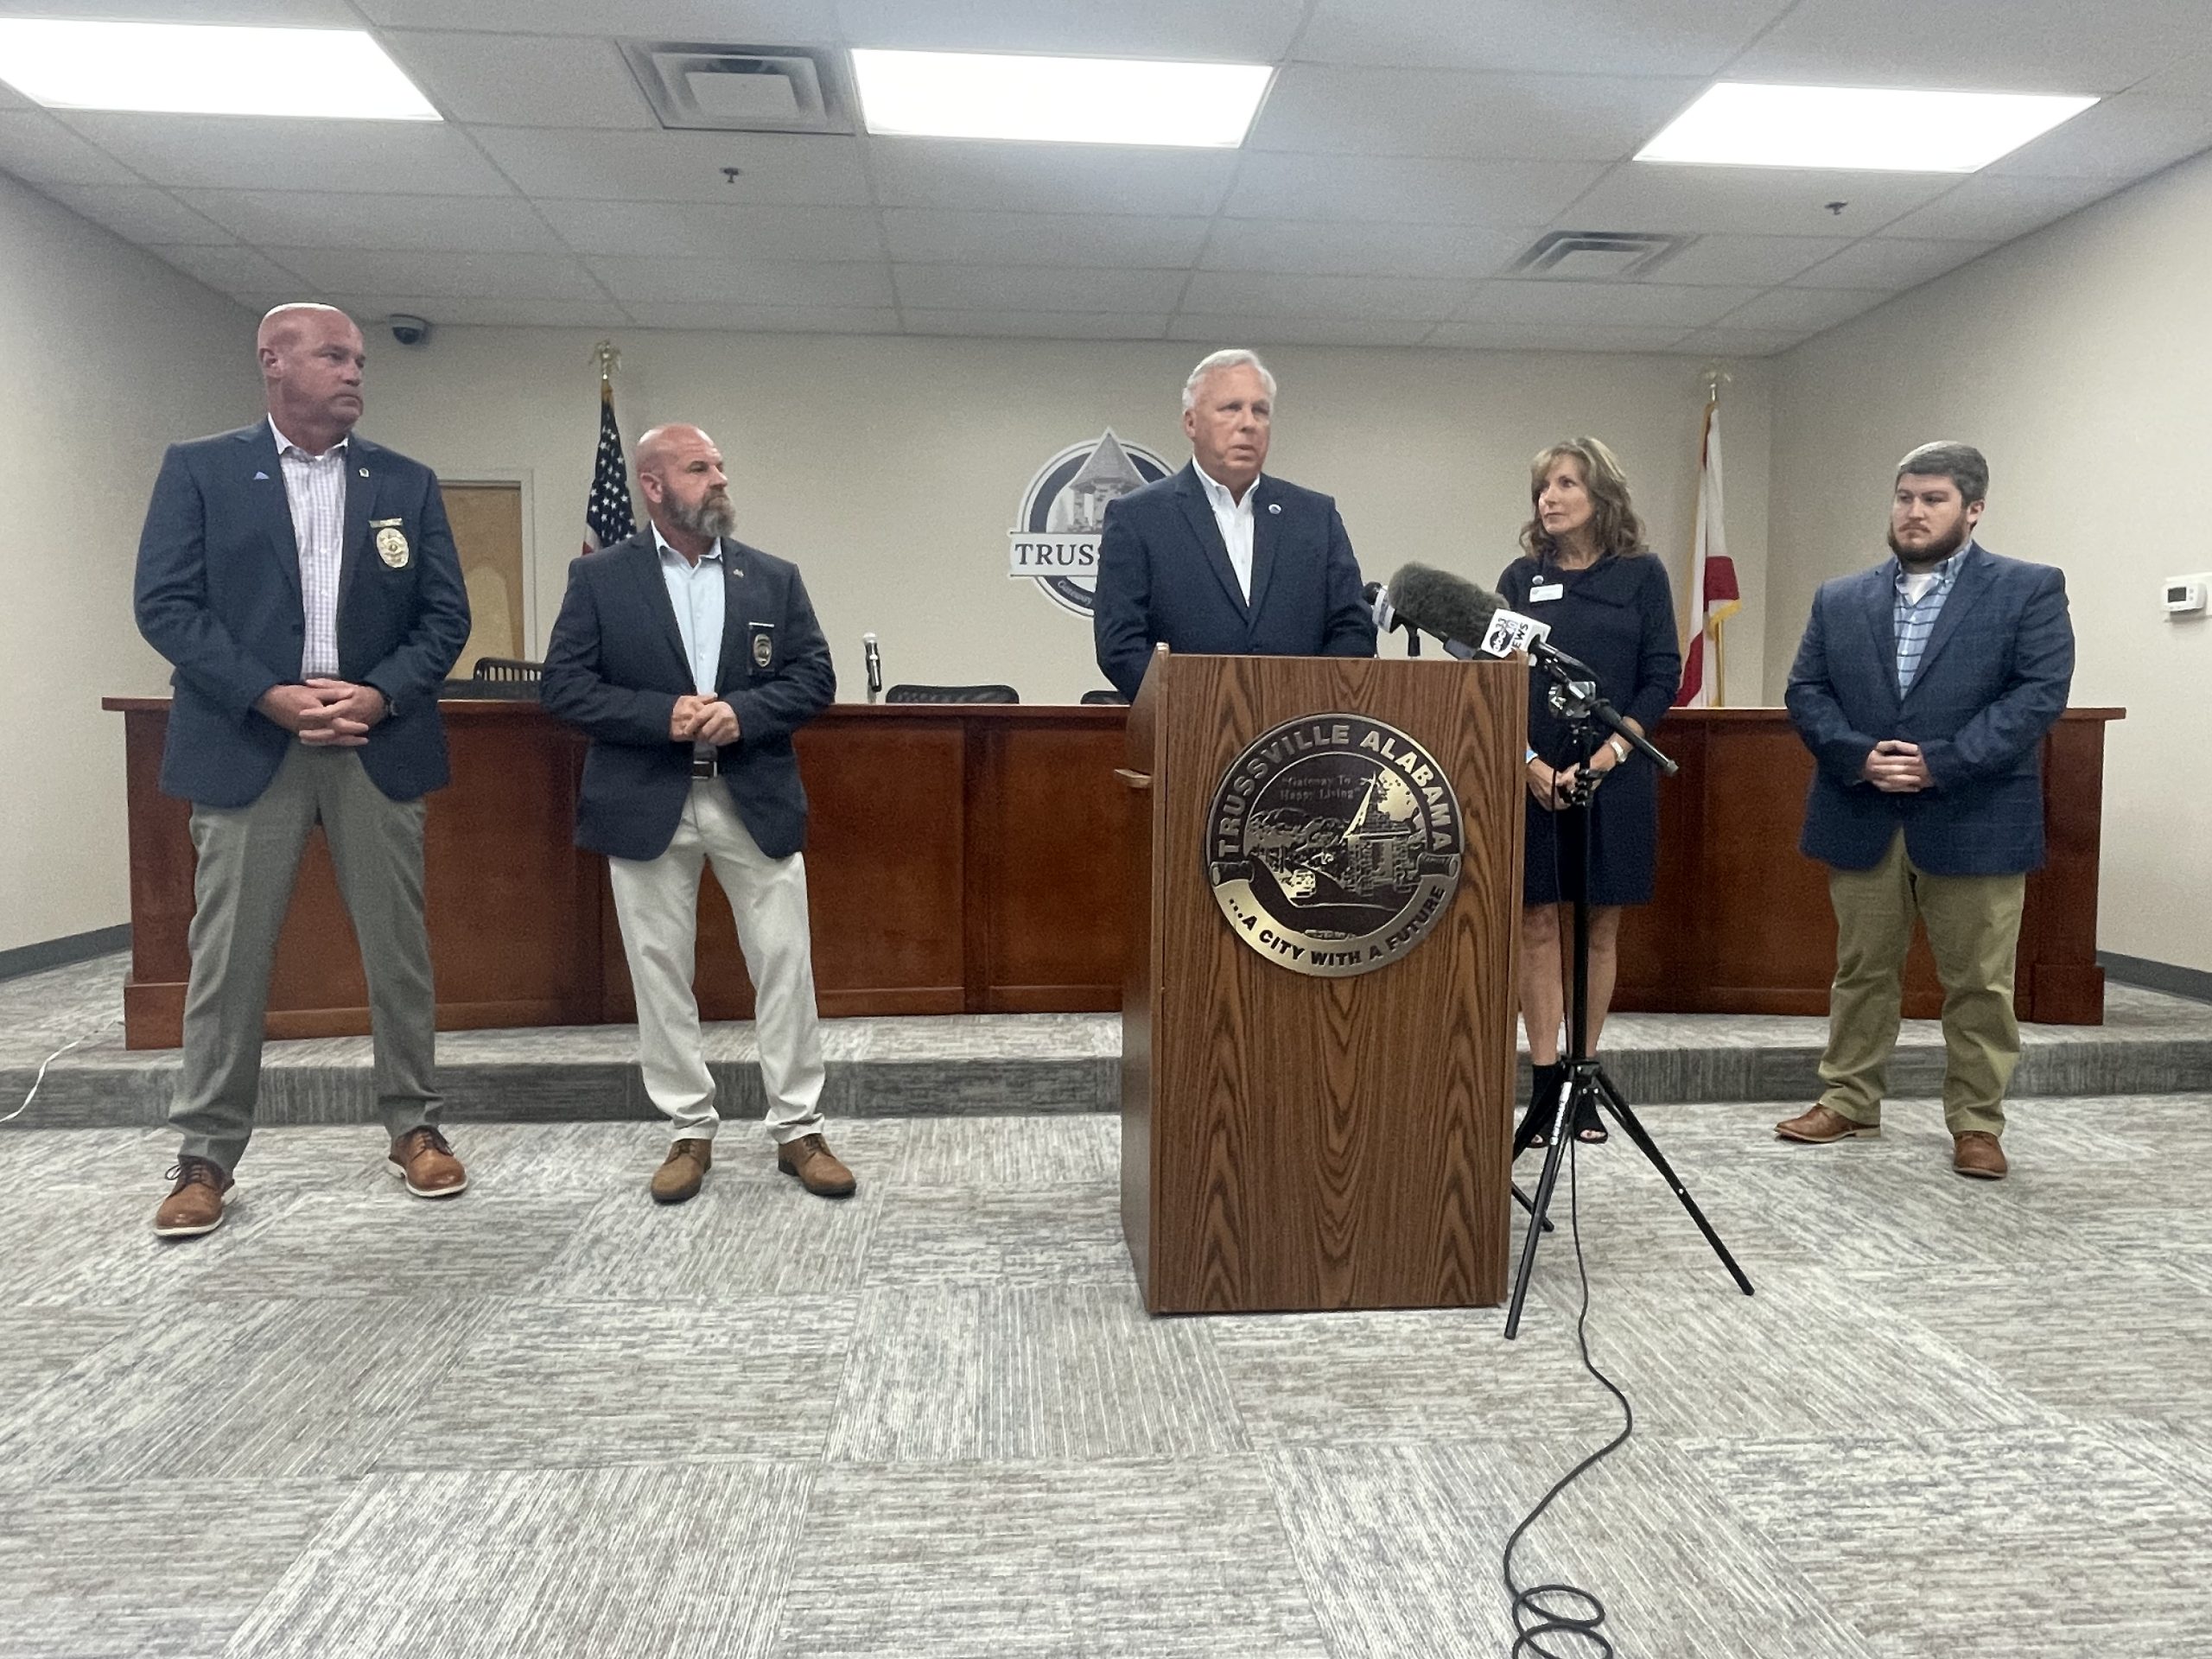 Trussville Mayor holds press conference: 'We are in this together'